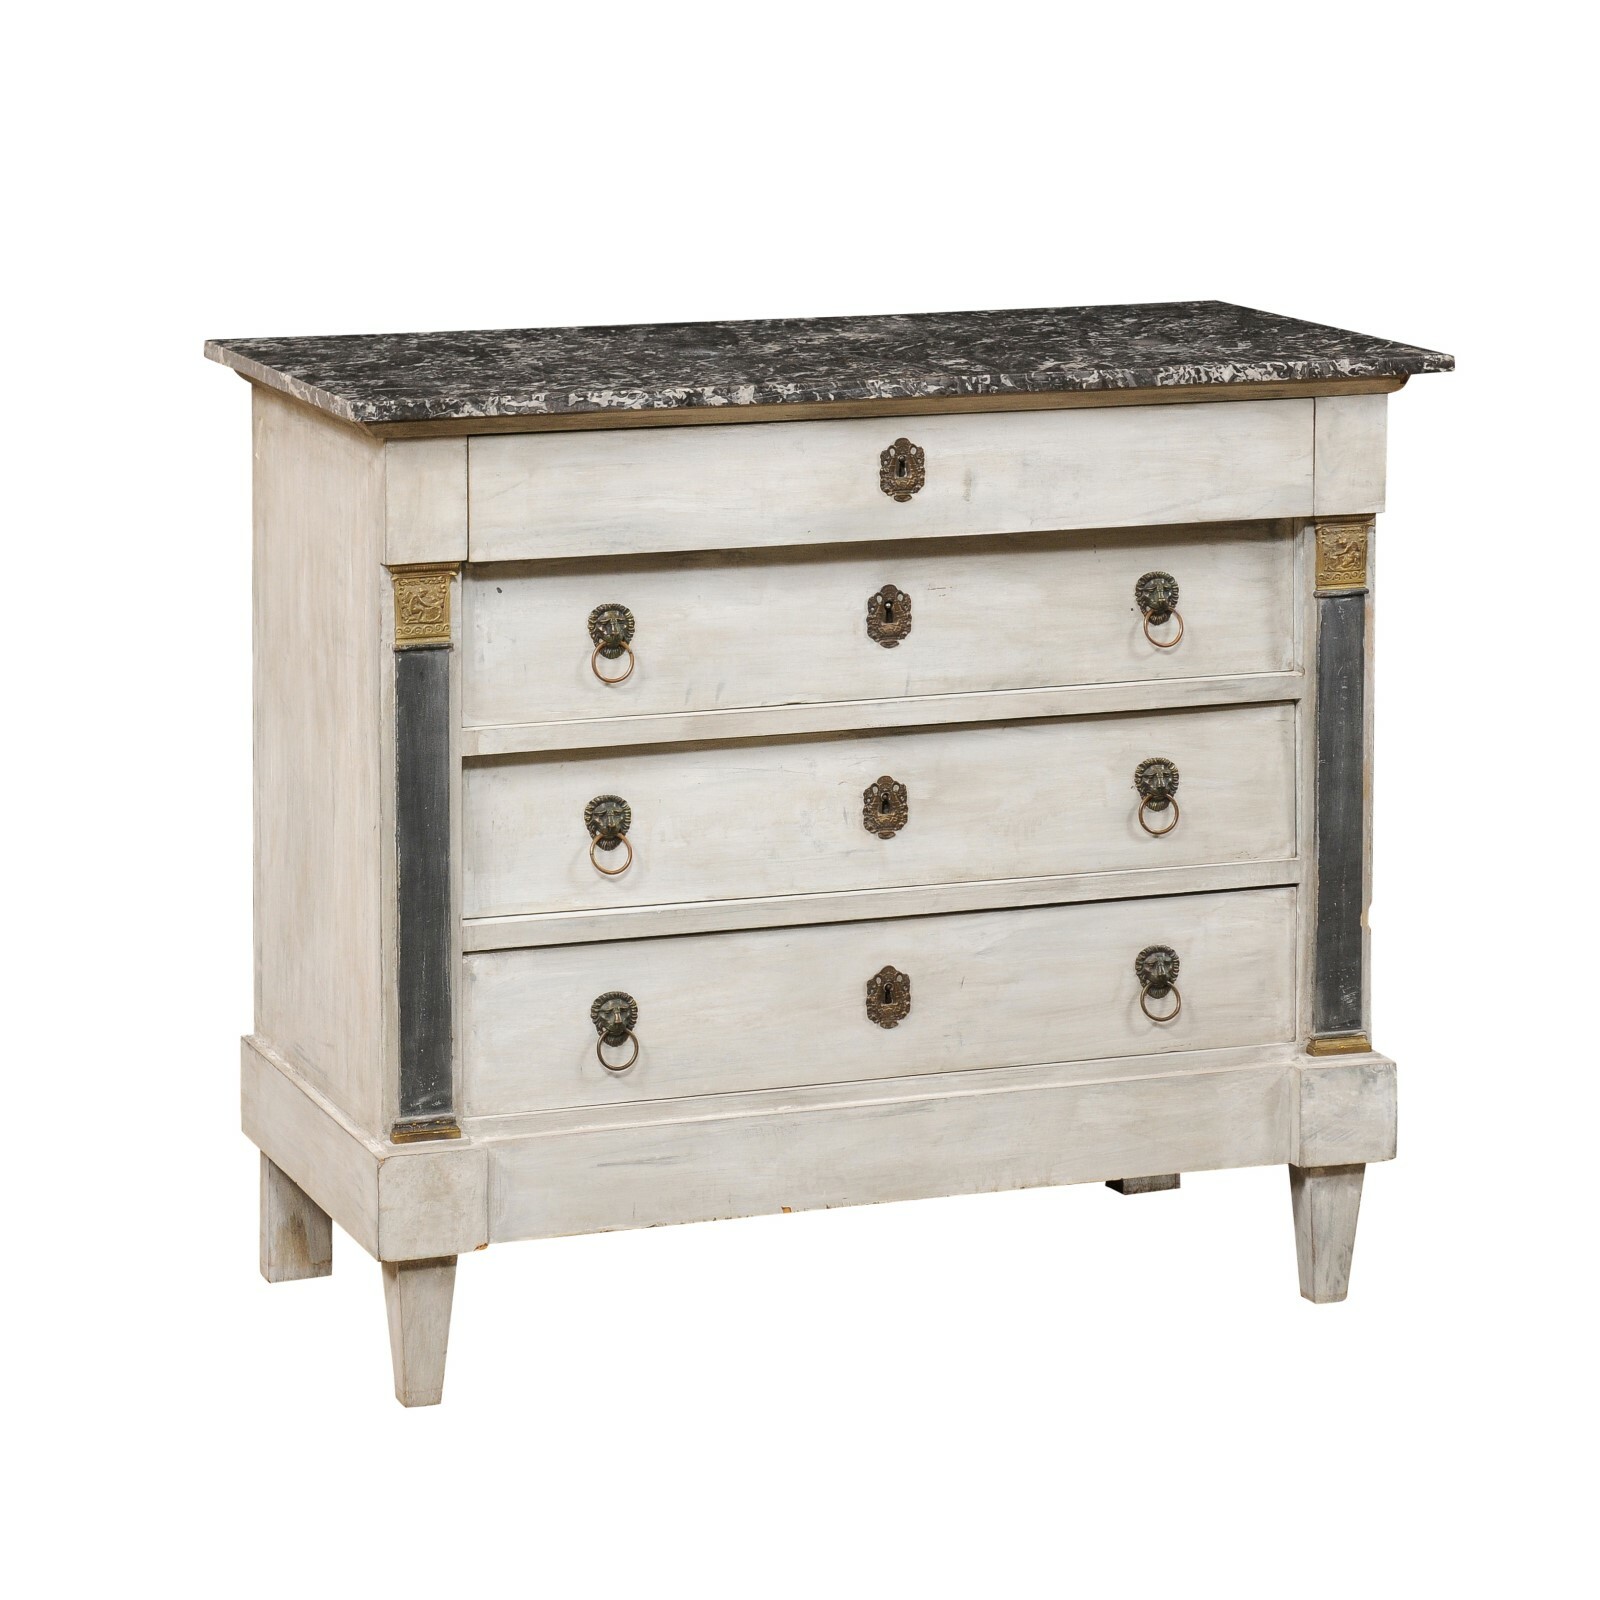 19th C. Neoclassic French Marble Top Chest